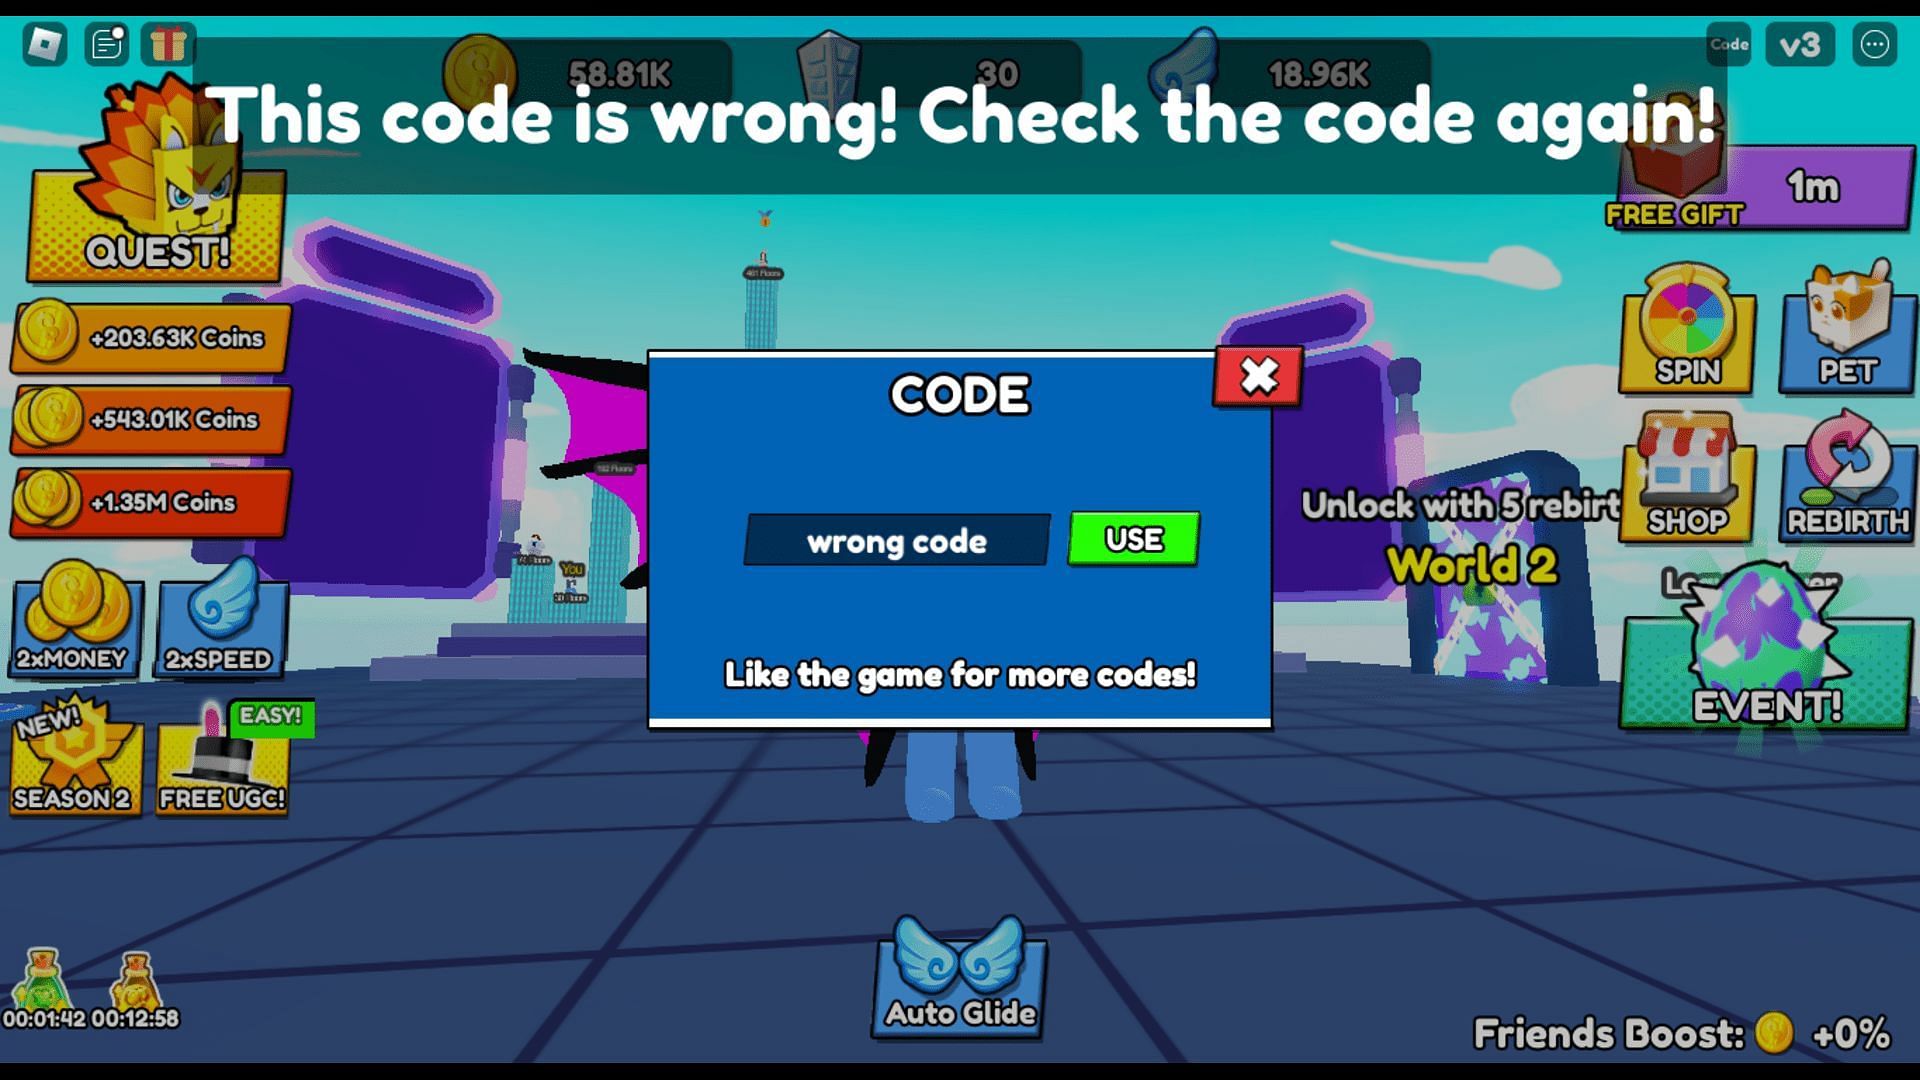 Troubleshoot codes in Building Towers to Fly Farther (Image via Roblox || Sportskeeda)